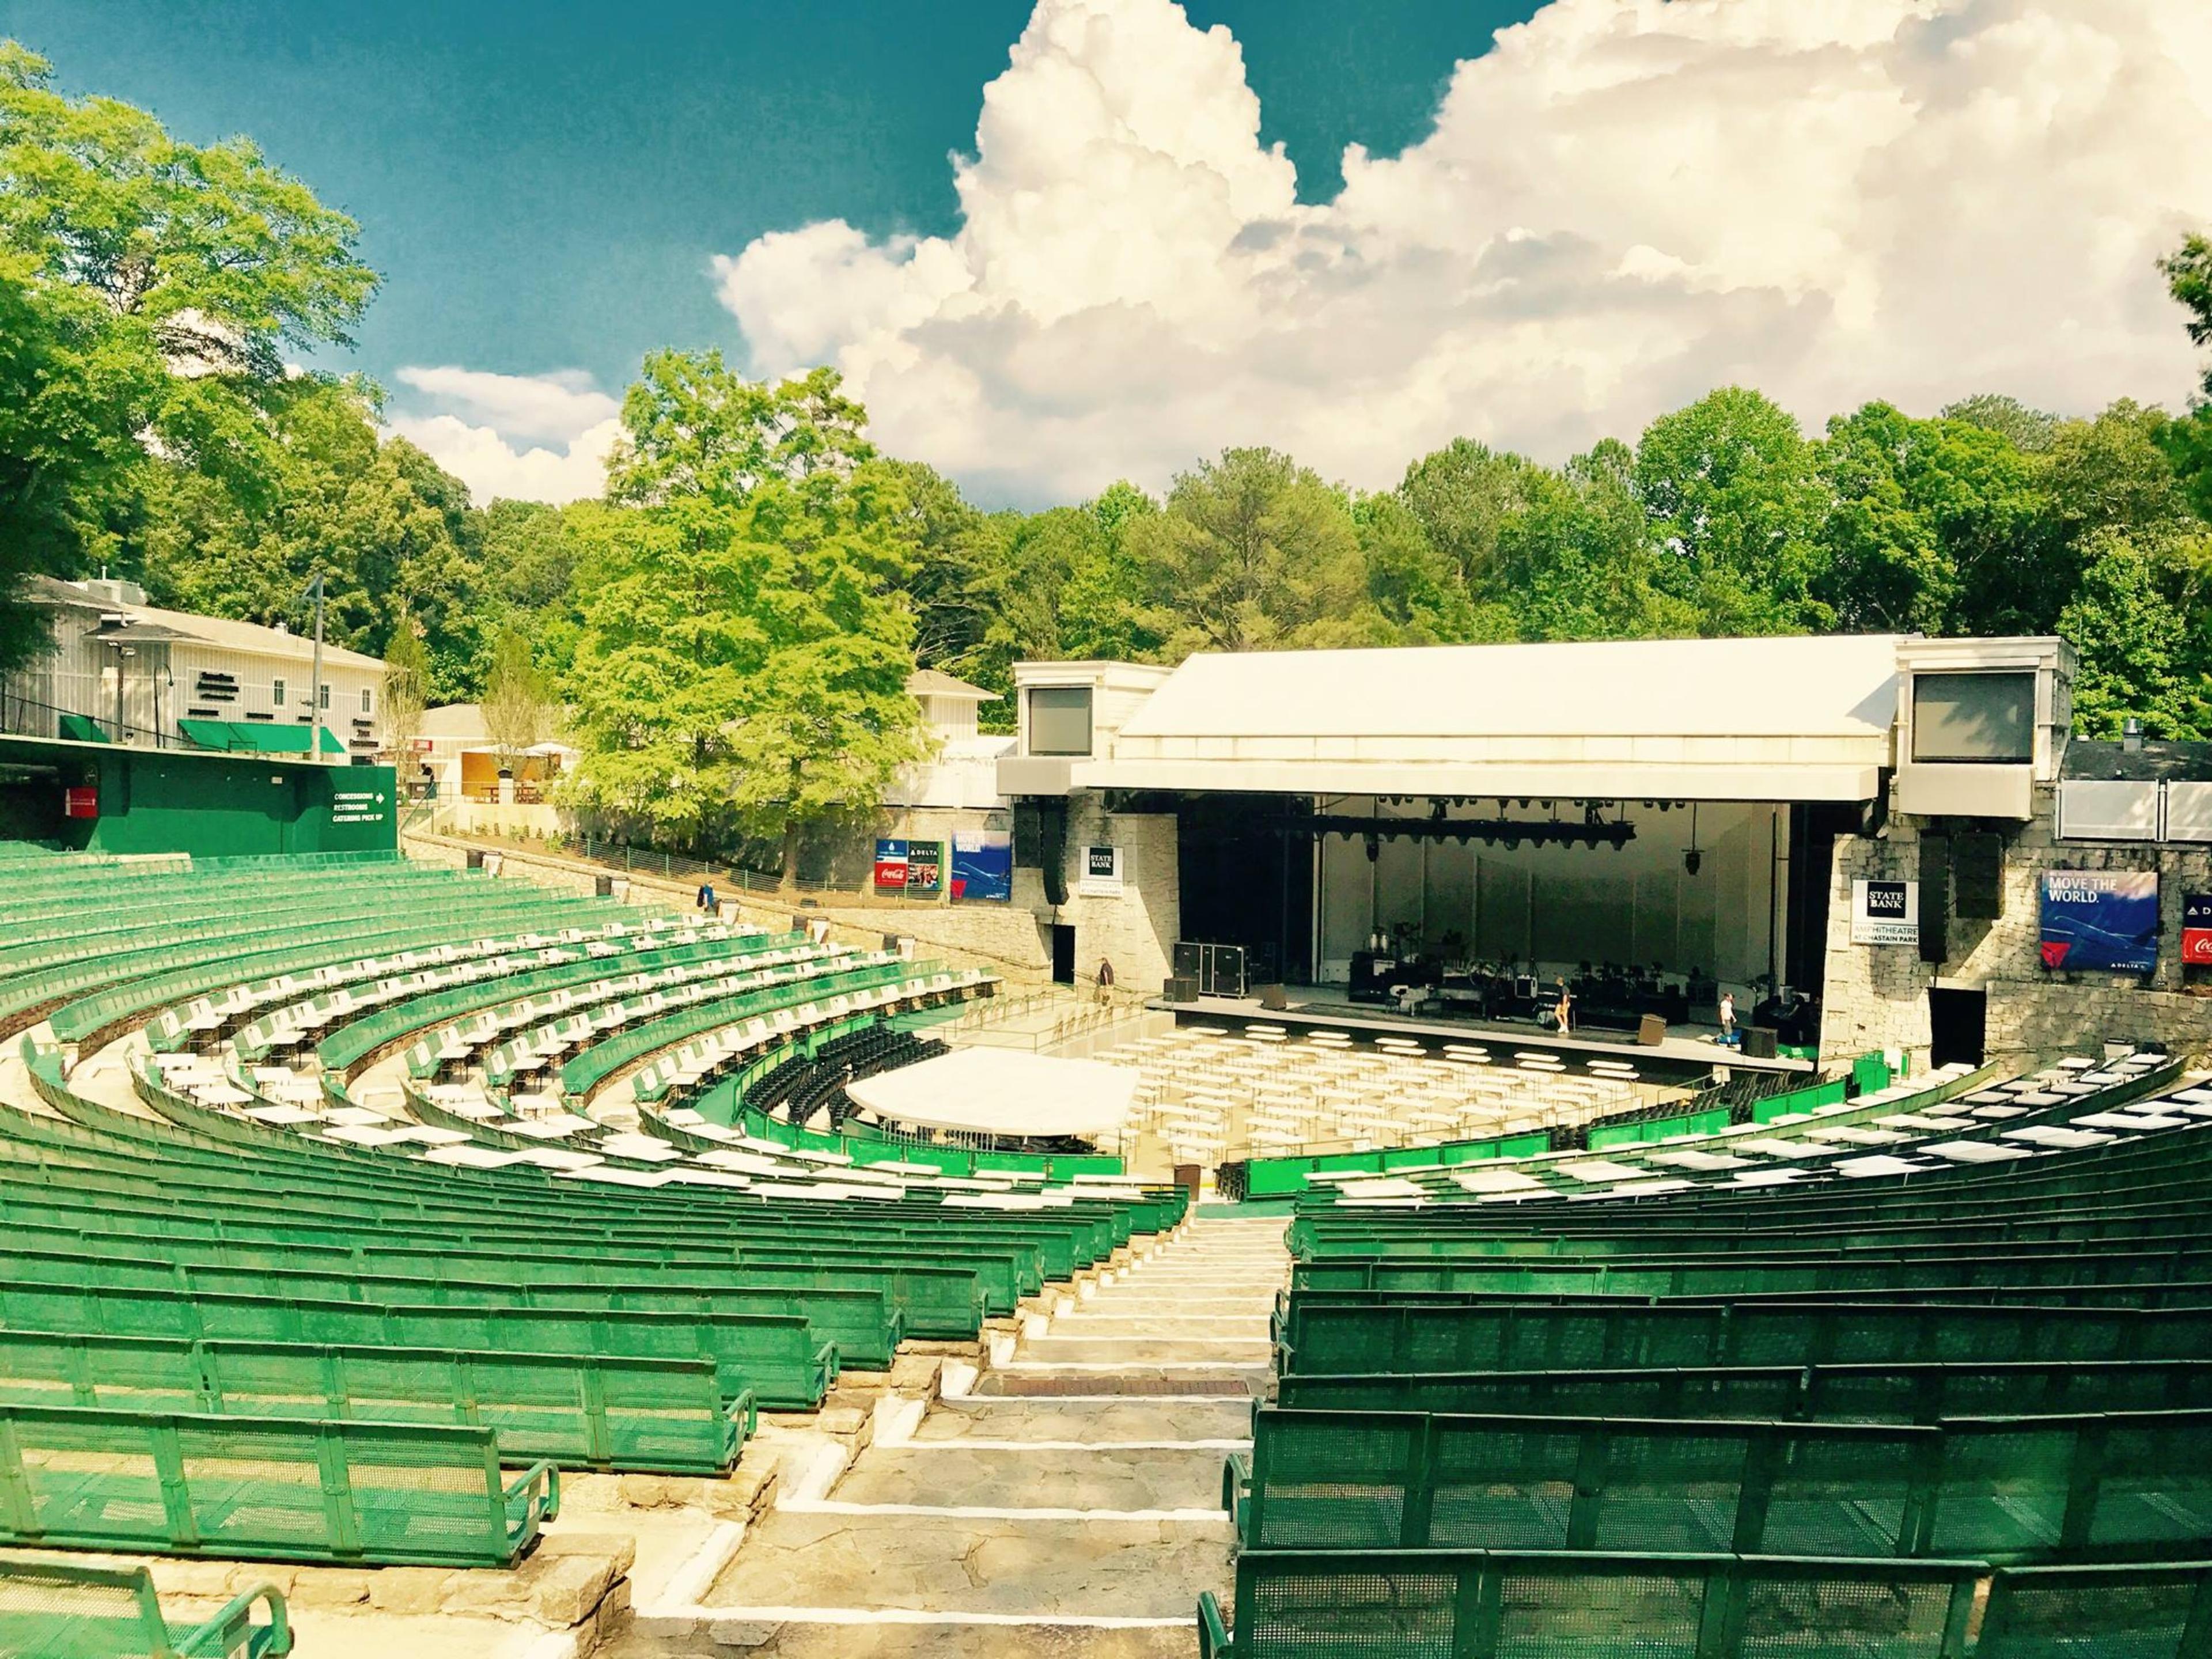 Cadence Bank Amphitheatre at Chastain Park